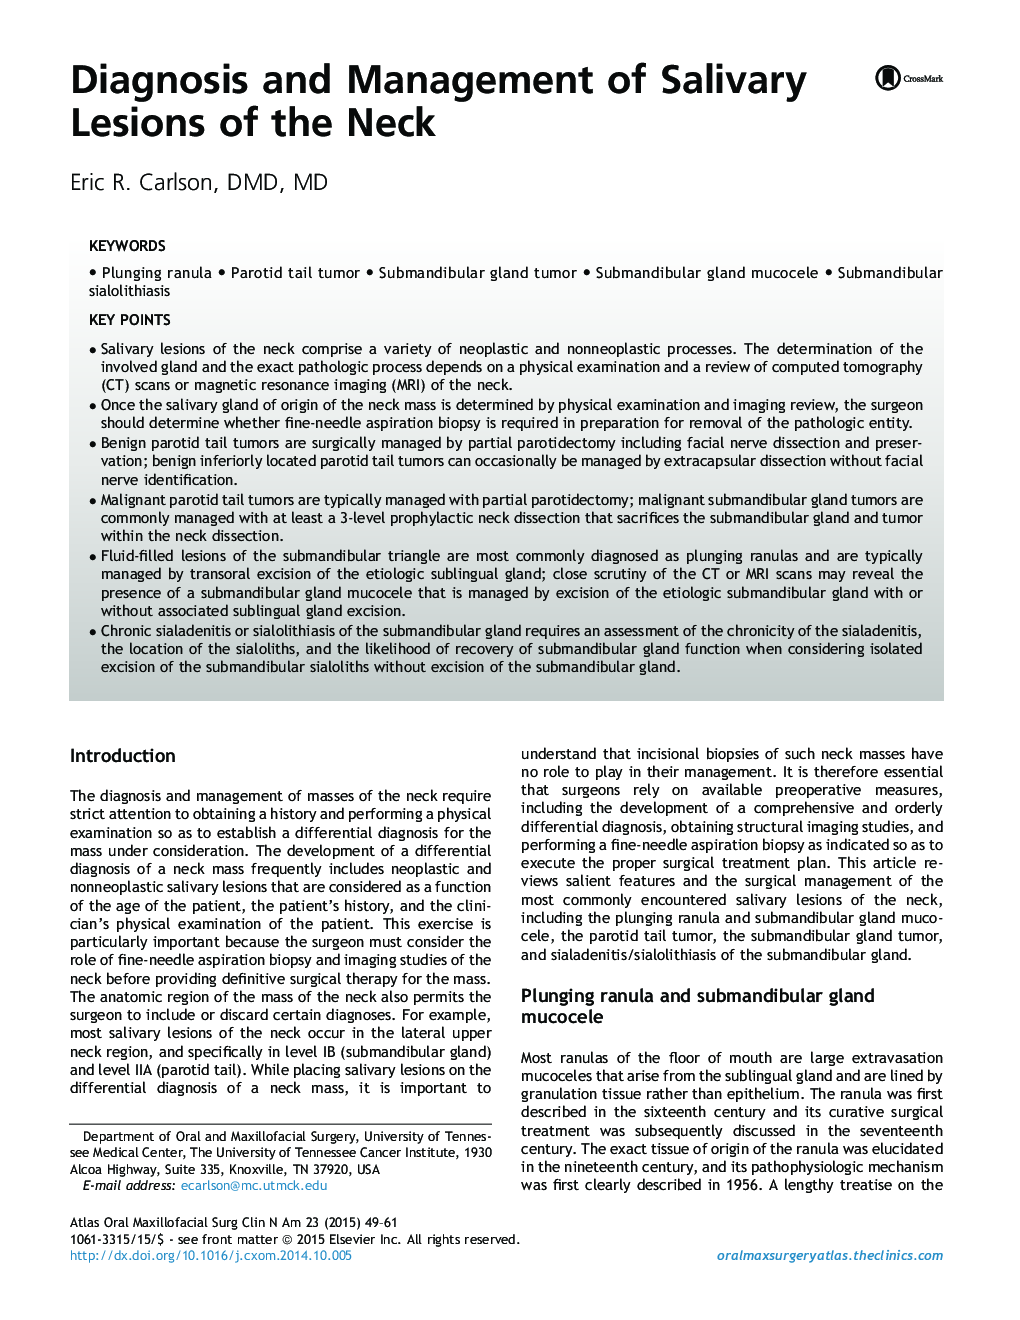 Diagnosis and Management of Salivary Lesions of the Neck